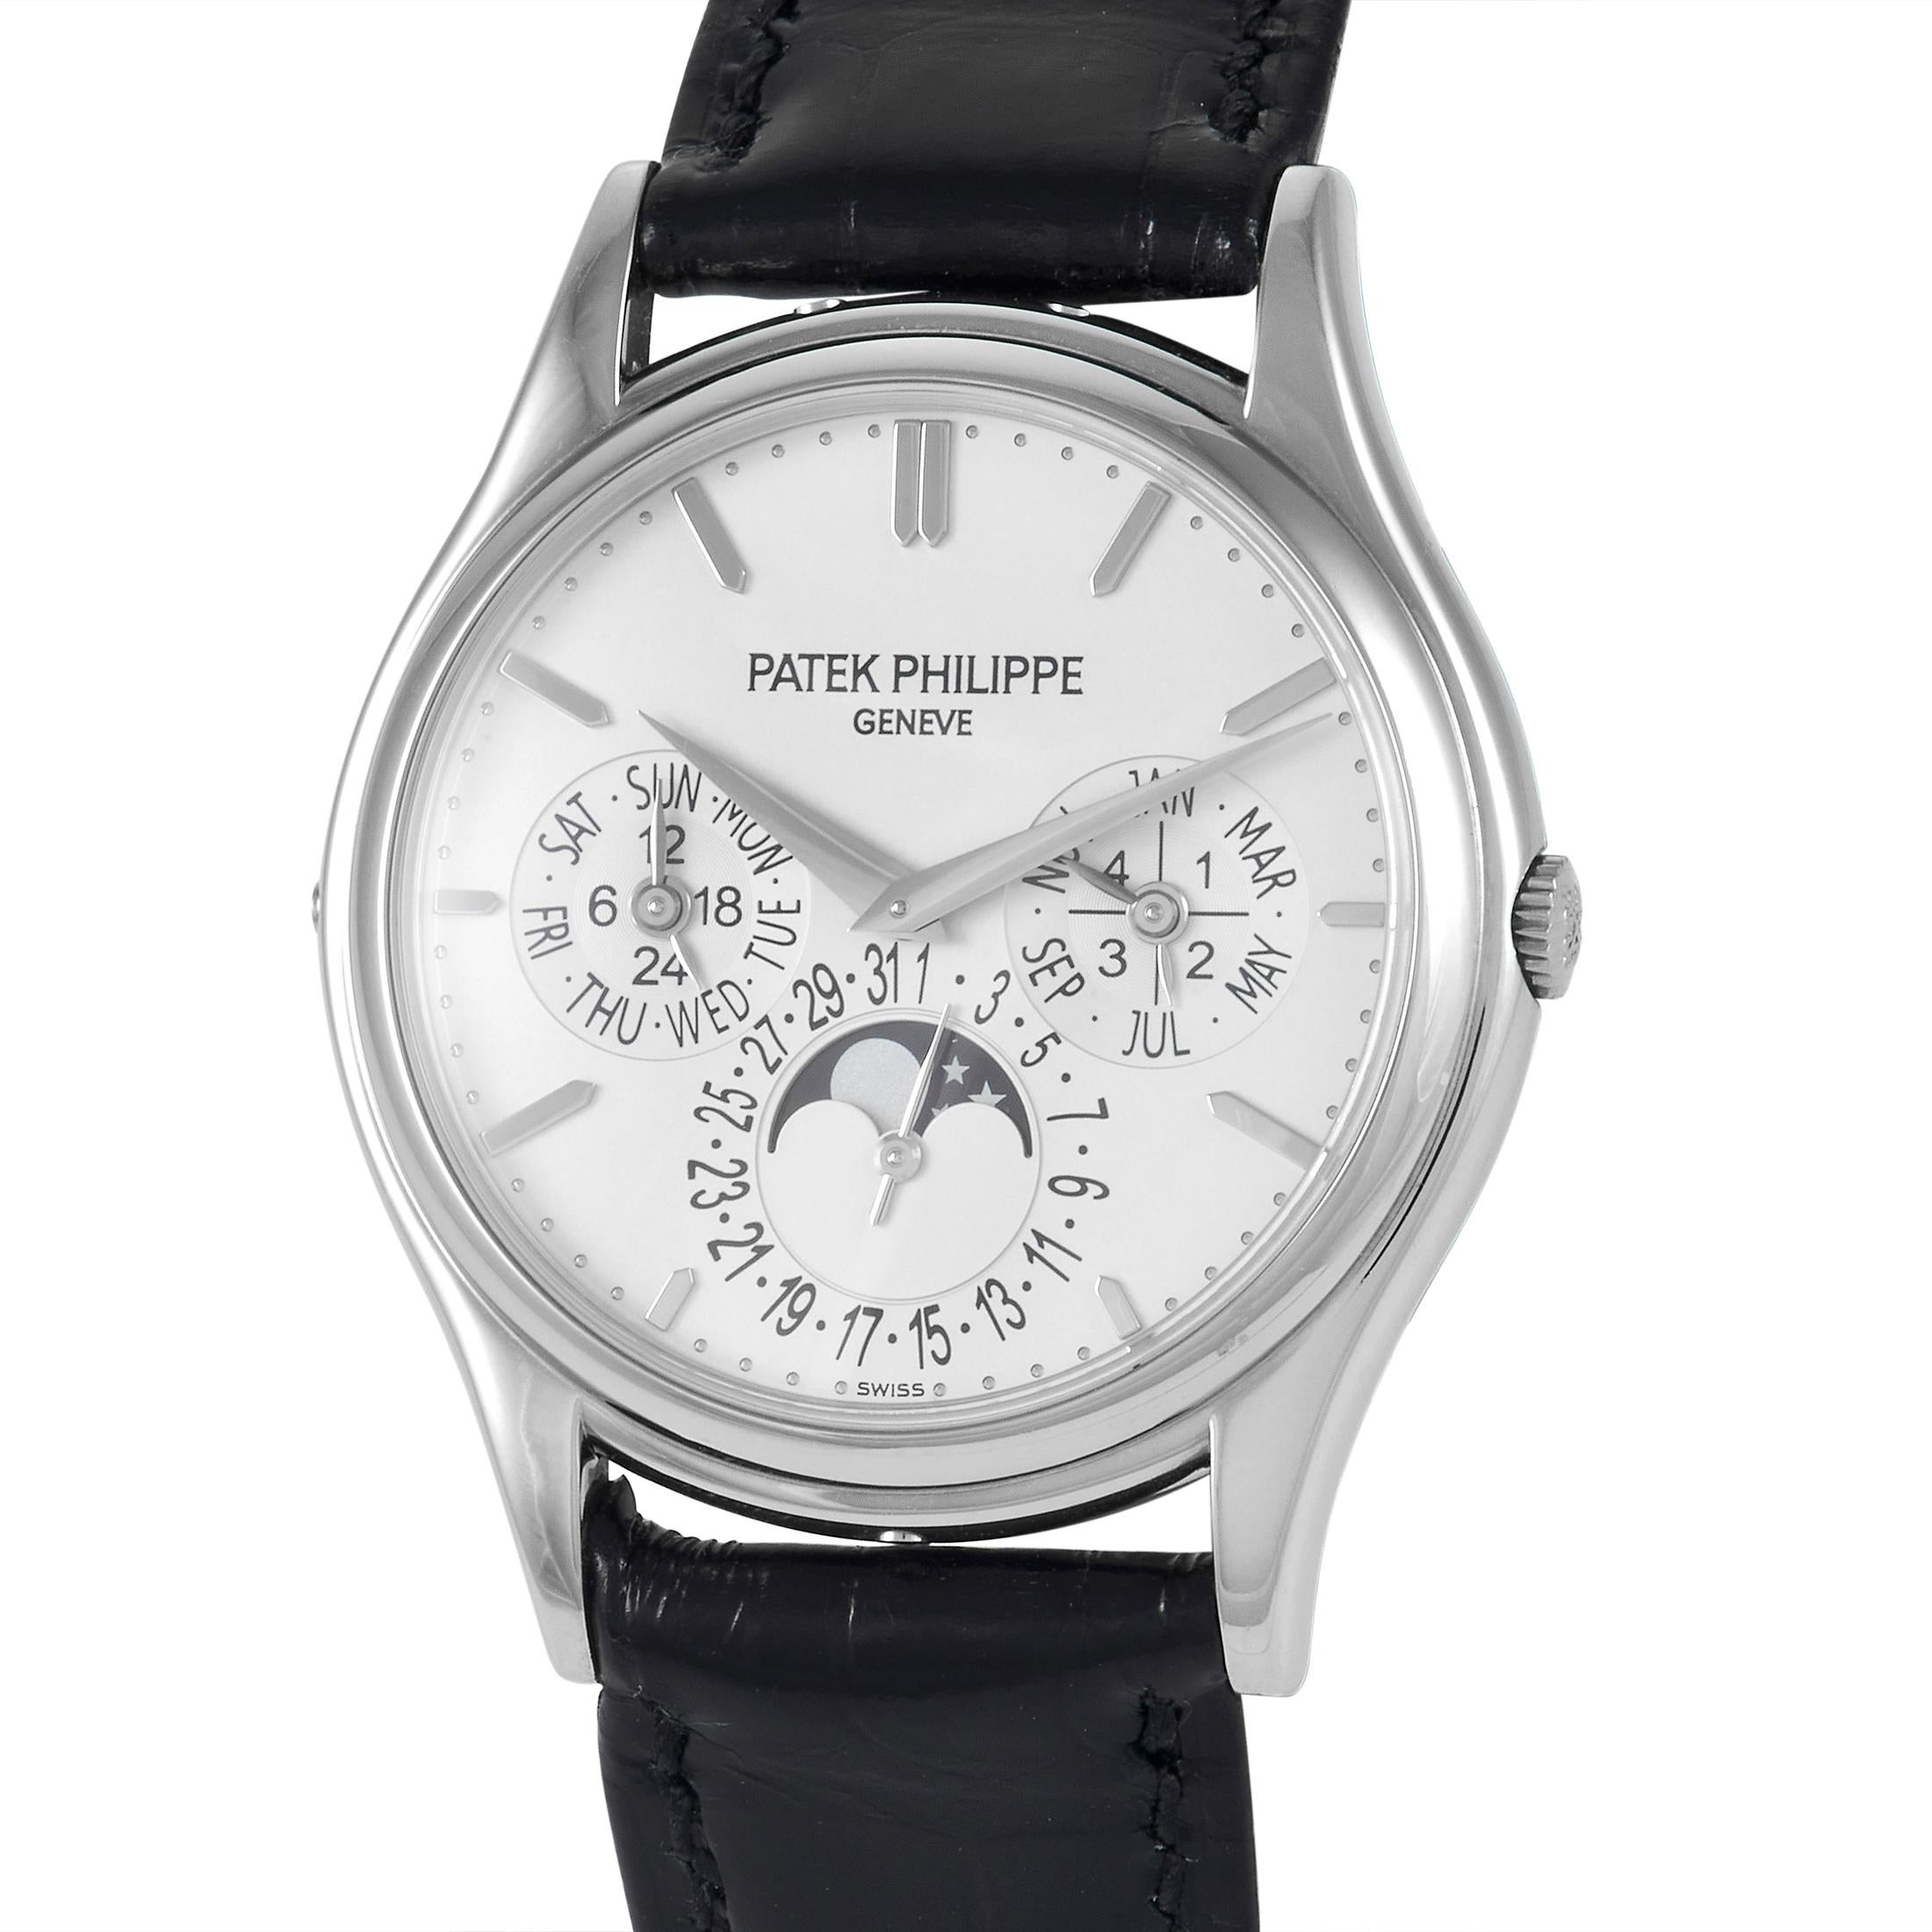 An attractive timepiece with a clever design, the Patek Philippe Calatrava Perpetual  5140G-001 is guaranteed to catch eyes. The watch has a 37.2 mm case fashioned in 18-carat white gold. It has a sapphire front protecting a silver dial with three